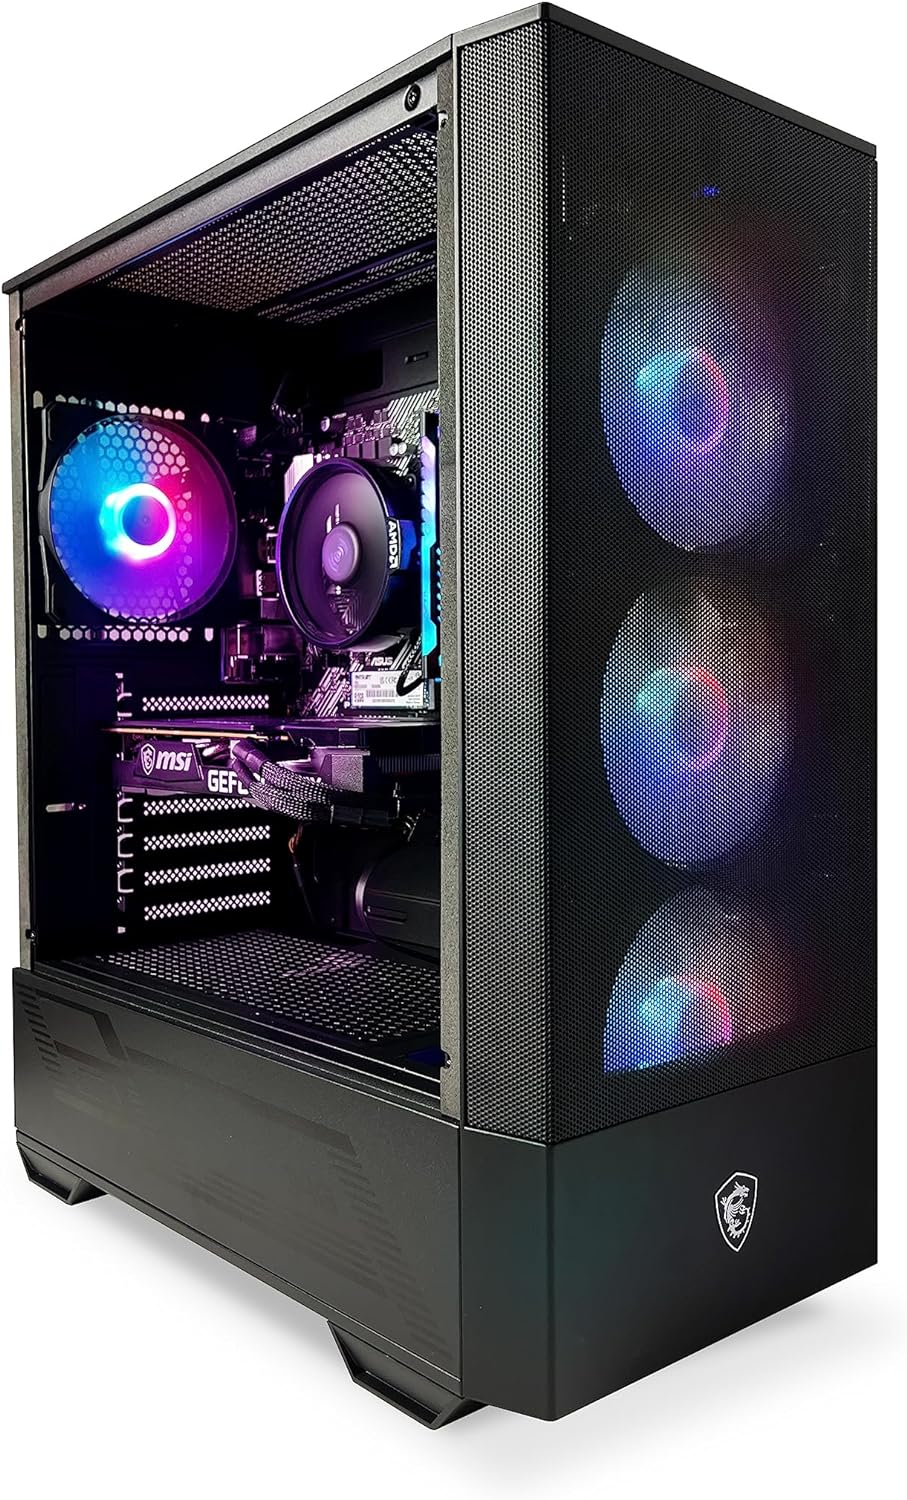 NSX GAMING Desktop PC Ryzen 5 5500,16 GB RAM,SSD 512 gb, RTX 3060,USB-C, Hdmi,Mouse and Keyboard Gamer, Win 11, Built in USA 12 Month Warranty on prebuilt Gaming pc WiFi Ready